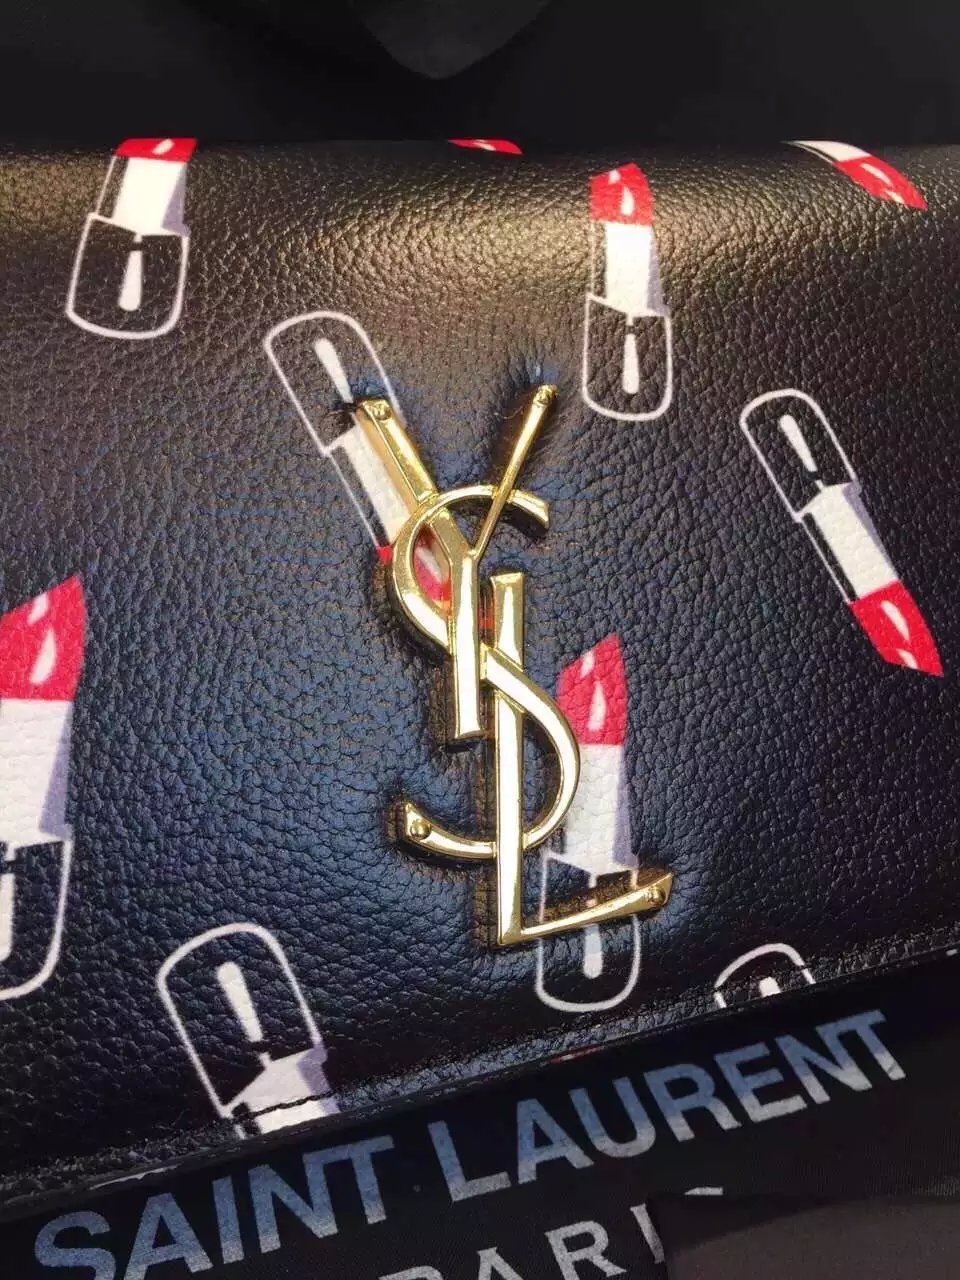 2015 New Saint Laurent Bag Cheap Sale-Saint Laurent Classic Monogram Clutch in Black,Red and White Lipstick Printed Leather - Click Image to Close